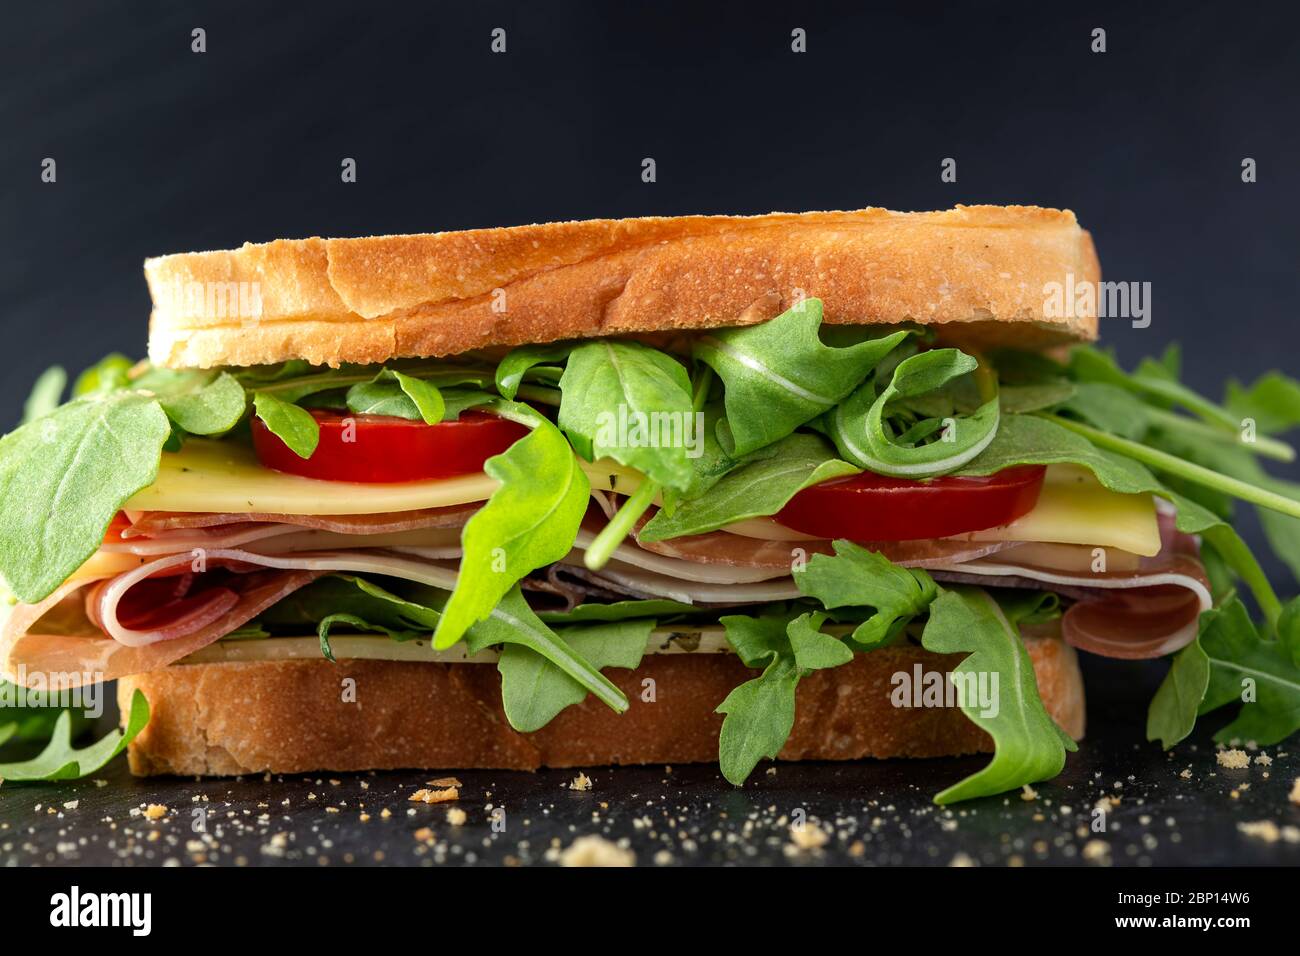 Sandwich with prosciutto, cheese with nettles, tomatoes and a lot of aragula Stock Photo